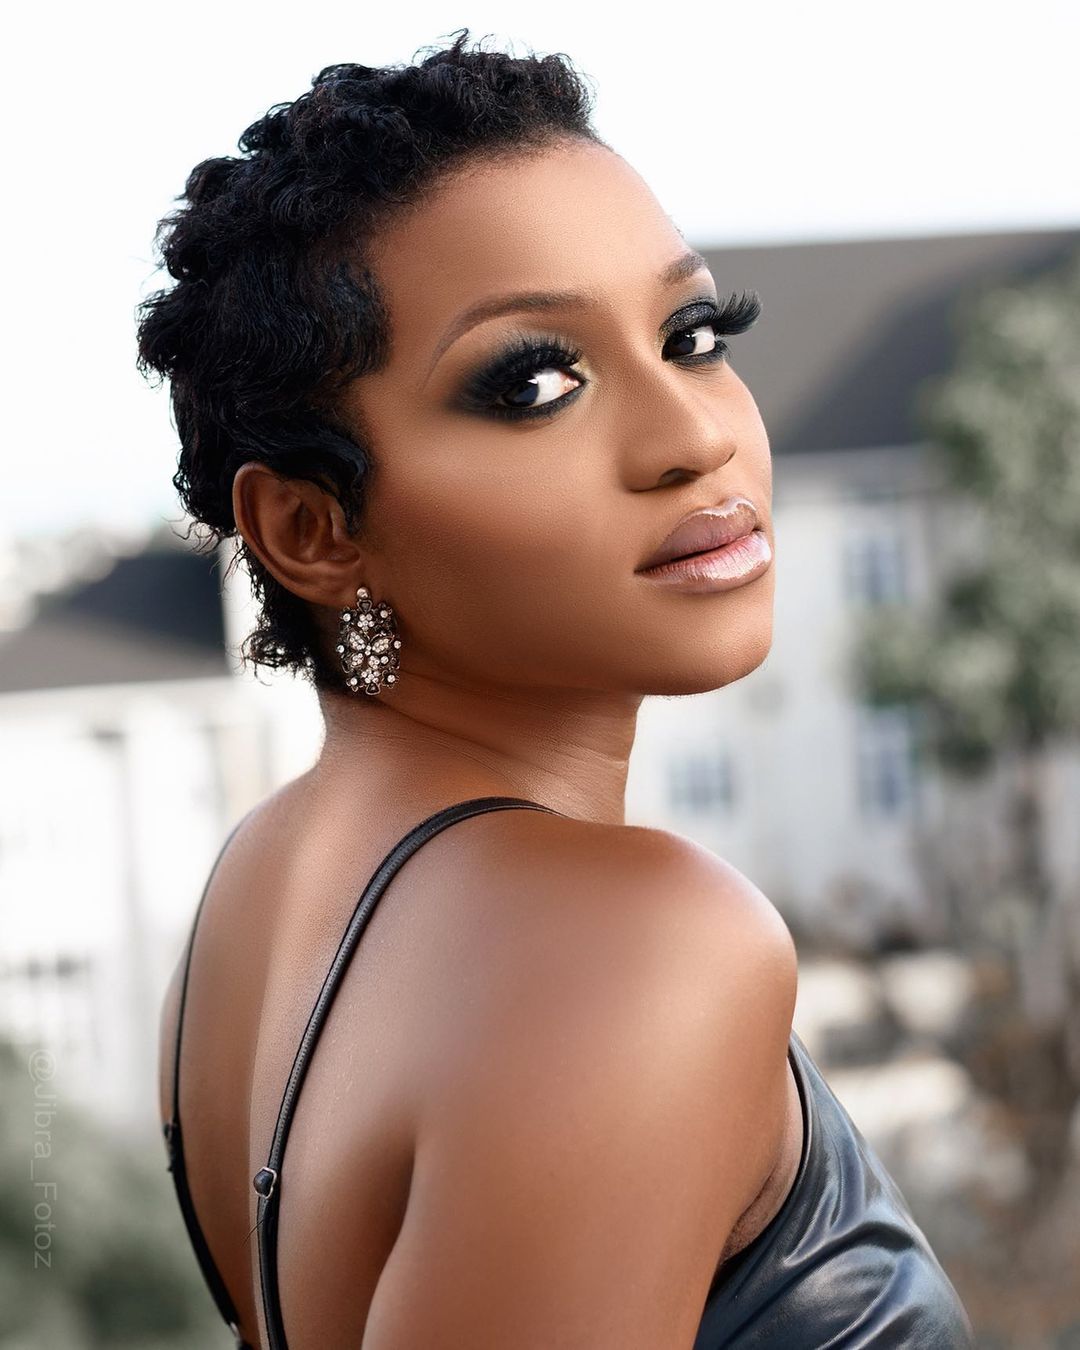 Low Cut Hairstyles - Low Haircut Styles And Trends For The Natural Hair  Woman - Fashion - Nigeria